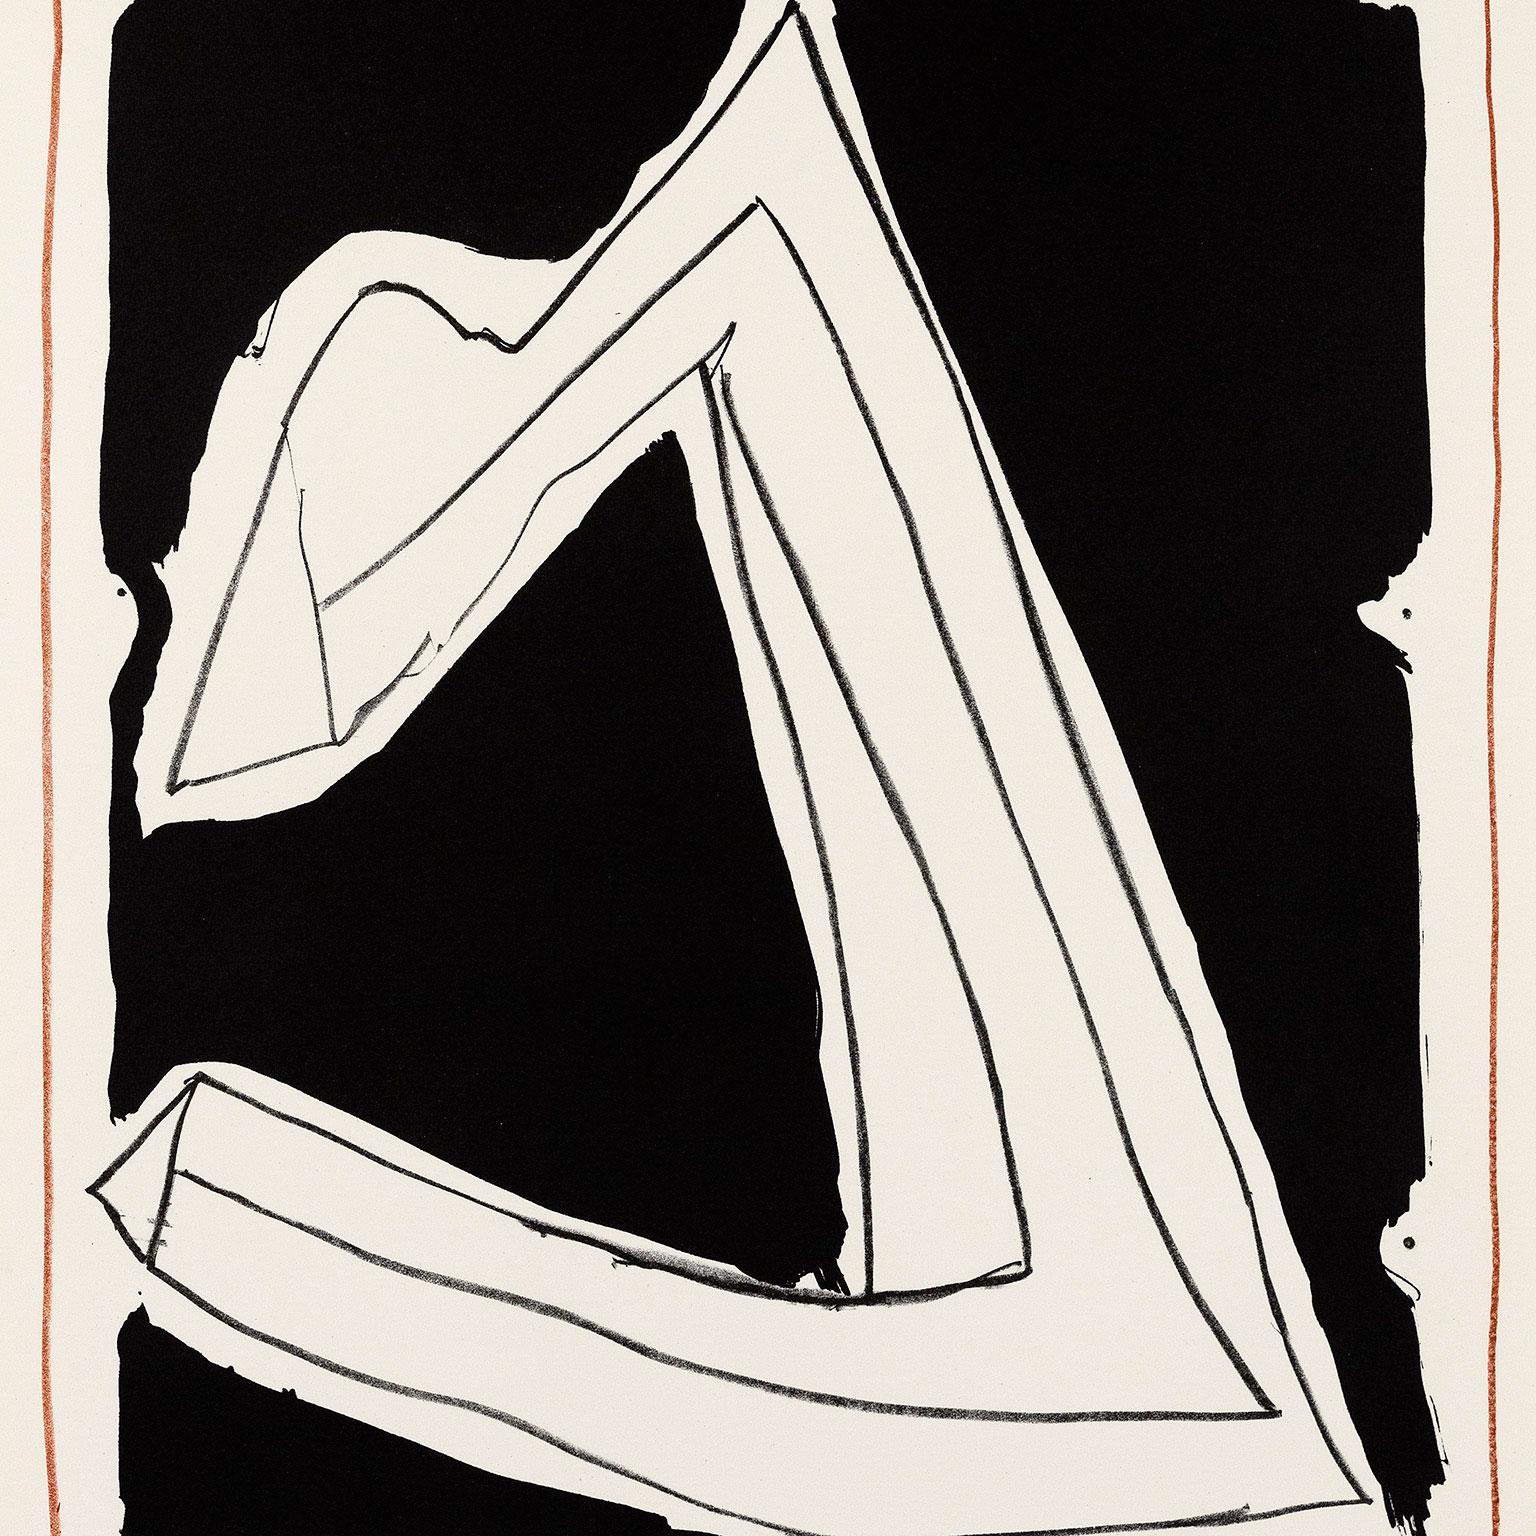 Summertime in Italy (With Lines) - Print by Robert Motherwell